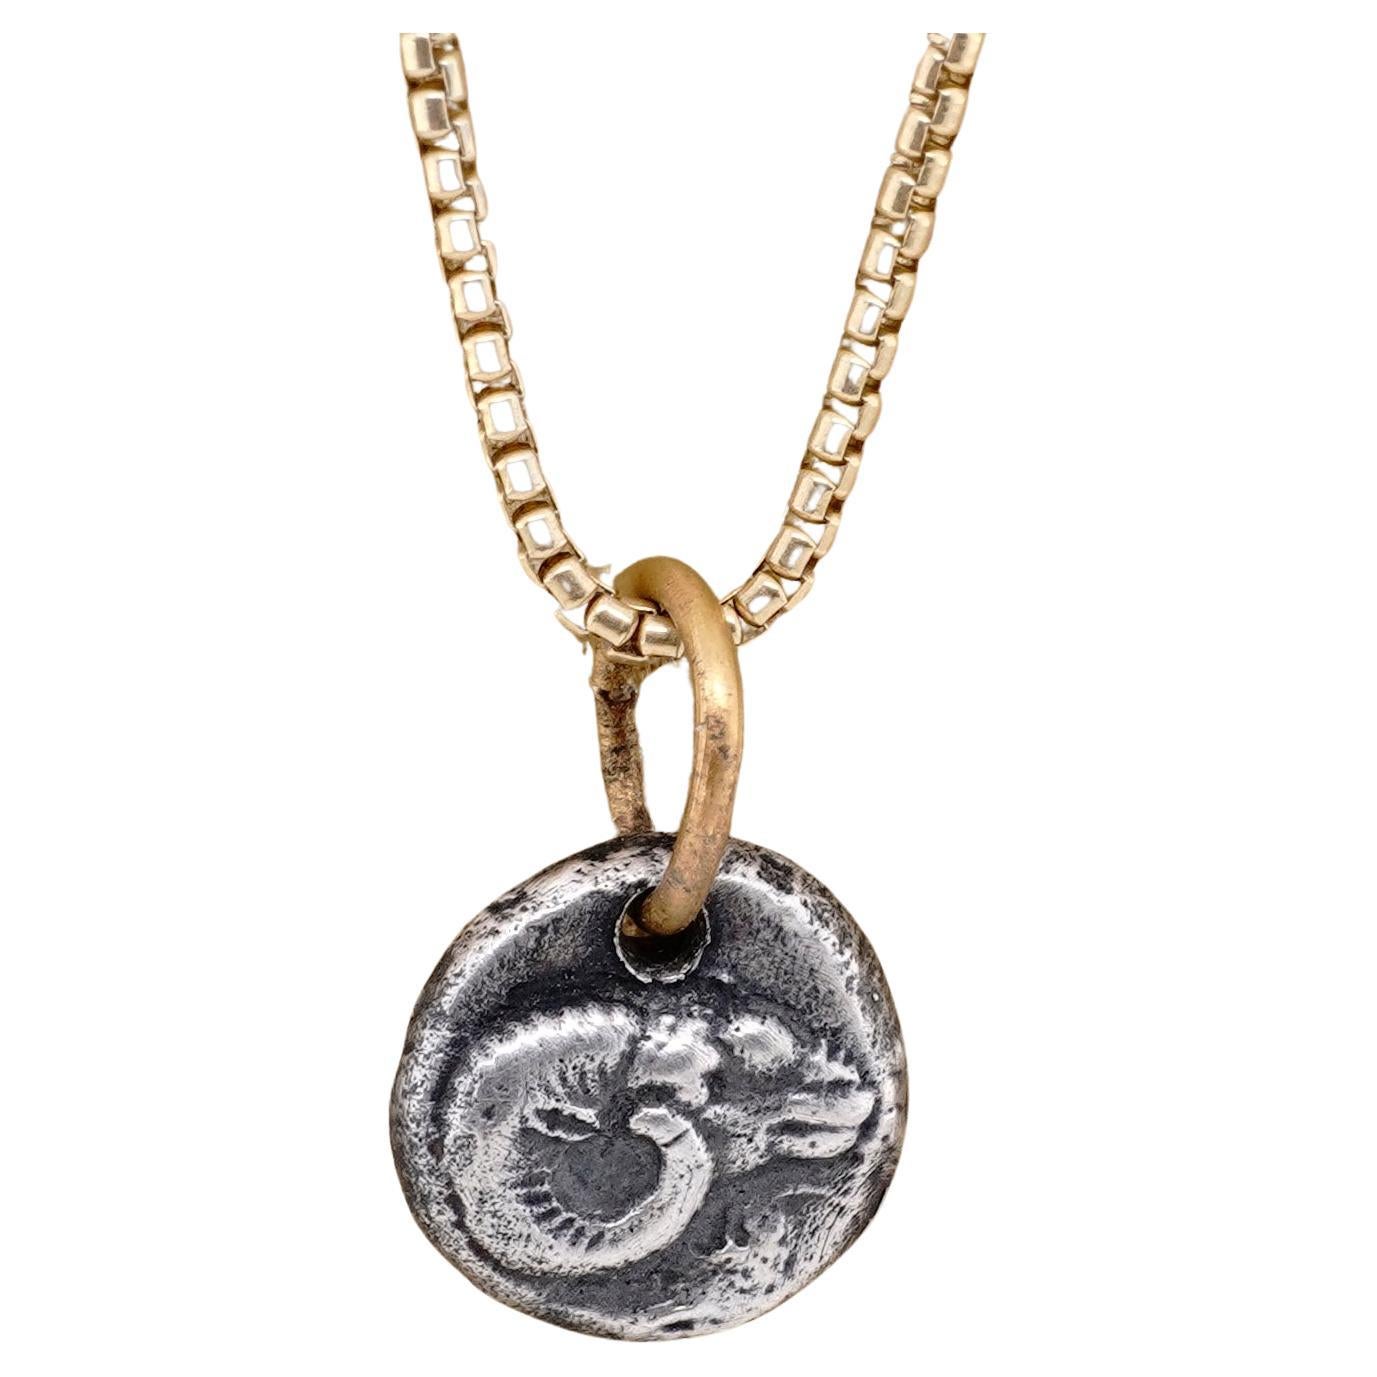 Double-Sided, Miniature Ram Coin Amulet, 24kt Gold and Silver, by Prehistoric Works of Istanbul, Turkey. Pendant: Sterling Silver with 24K Gold, miniature pendant, 10mm, comes with 14kt gold vermeil box chain, 16